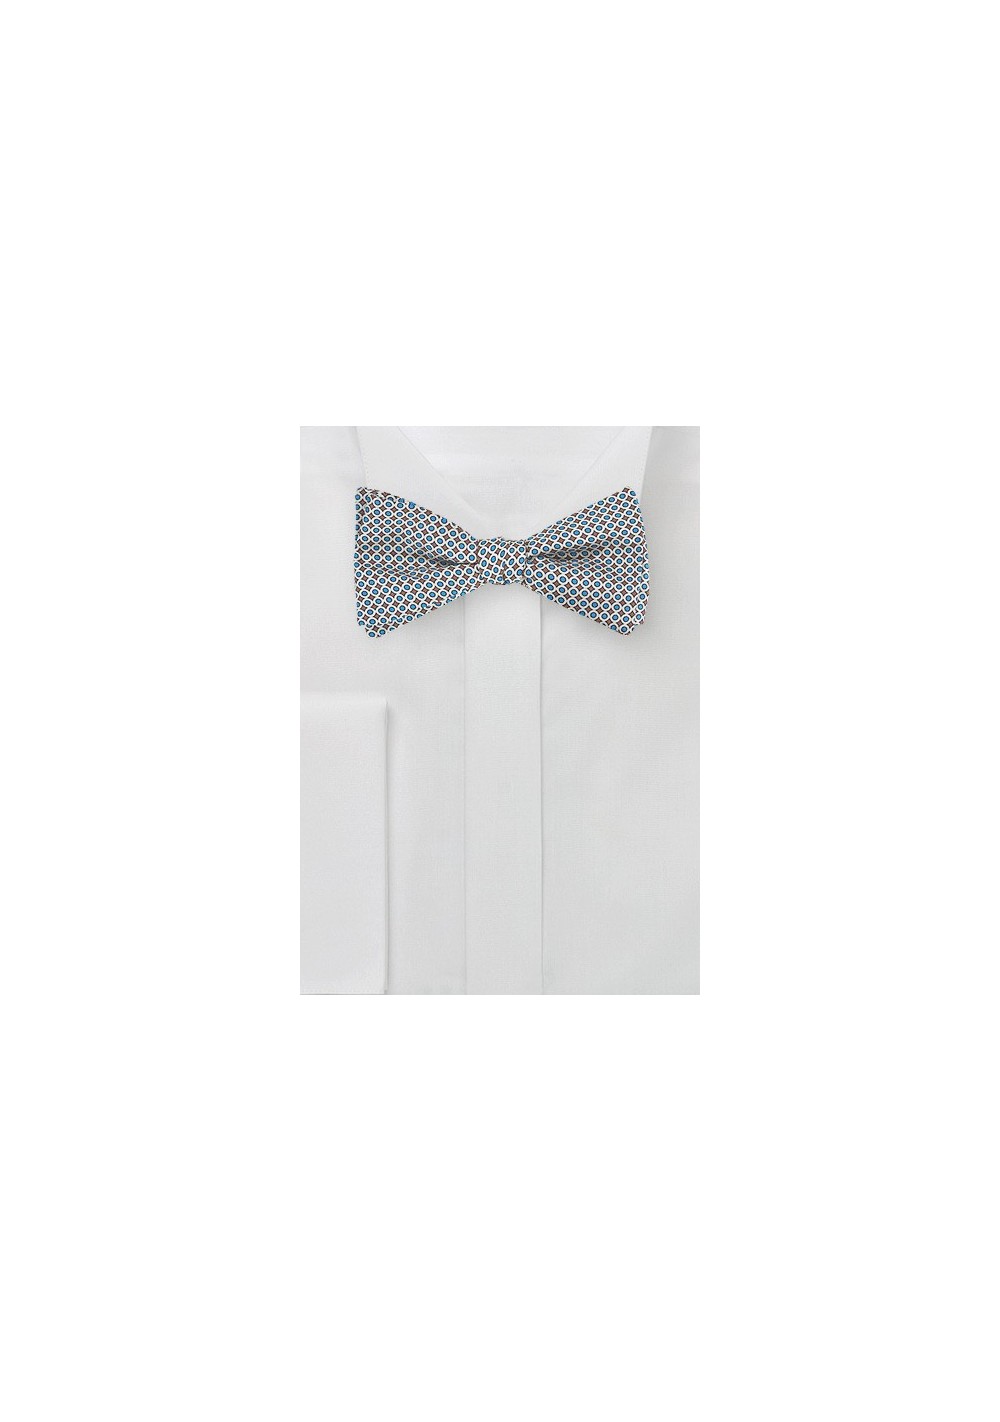 Geometric Print Silk Bow Tie in Silver and Blue